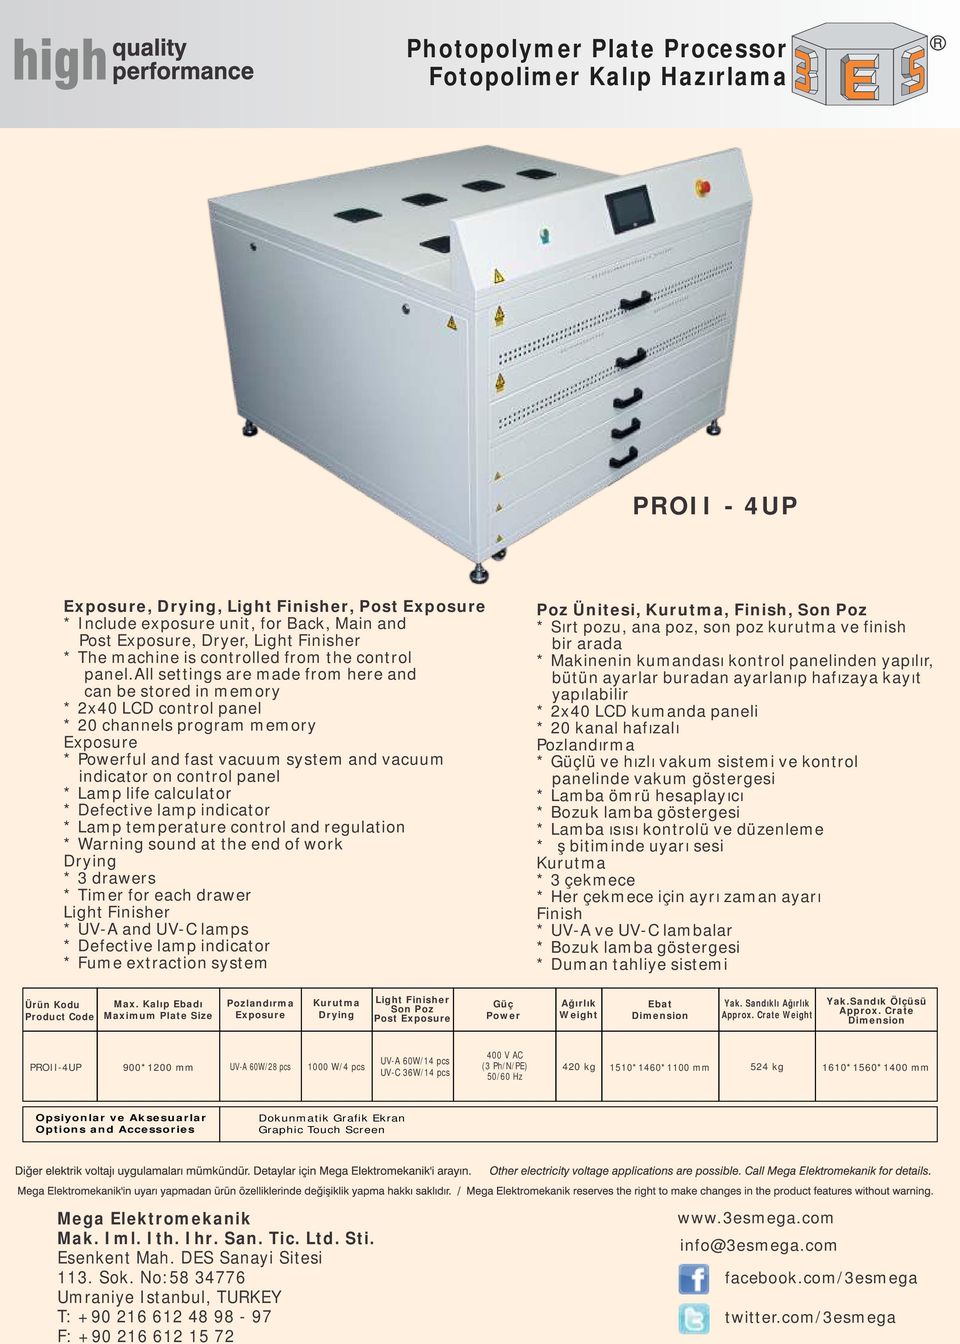 calculator * Lamp temperature control and regulation * Warning sound at the end of work * 3 drawers * Timer for each drawer * UV-A and UV-C lamps * Fume extraction system Poz Ünitesi,, Finish, * Sırt